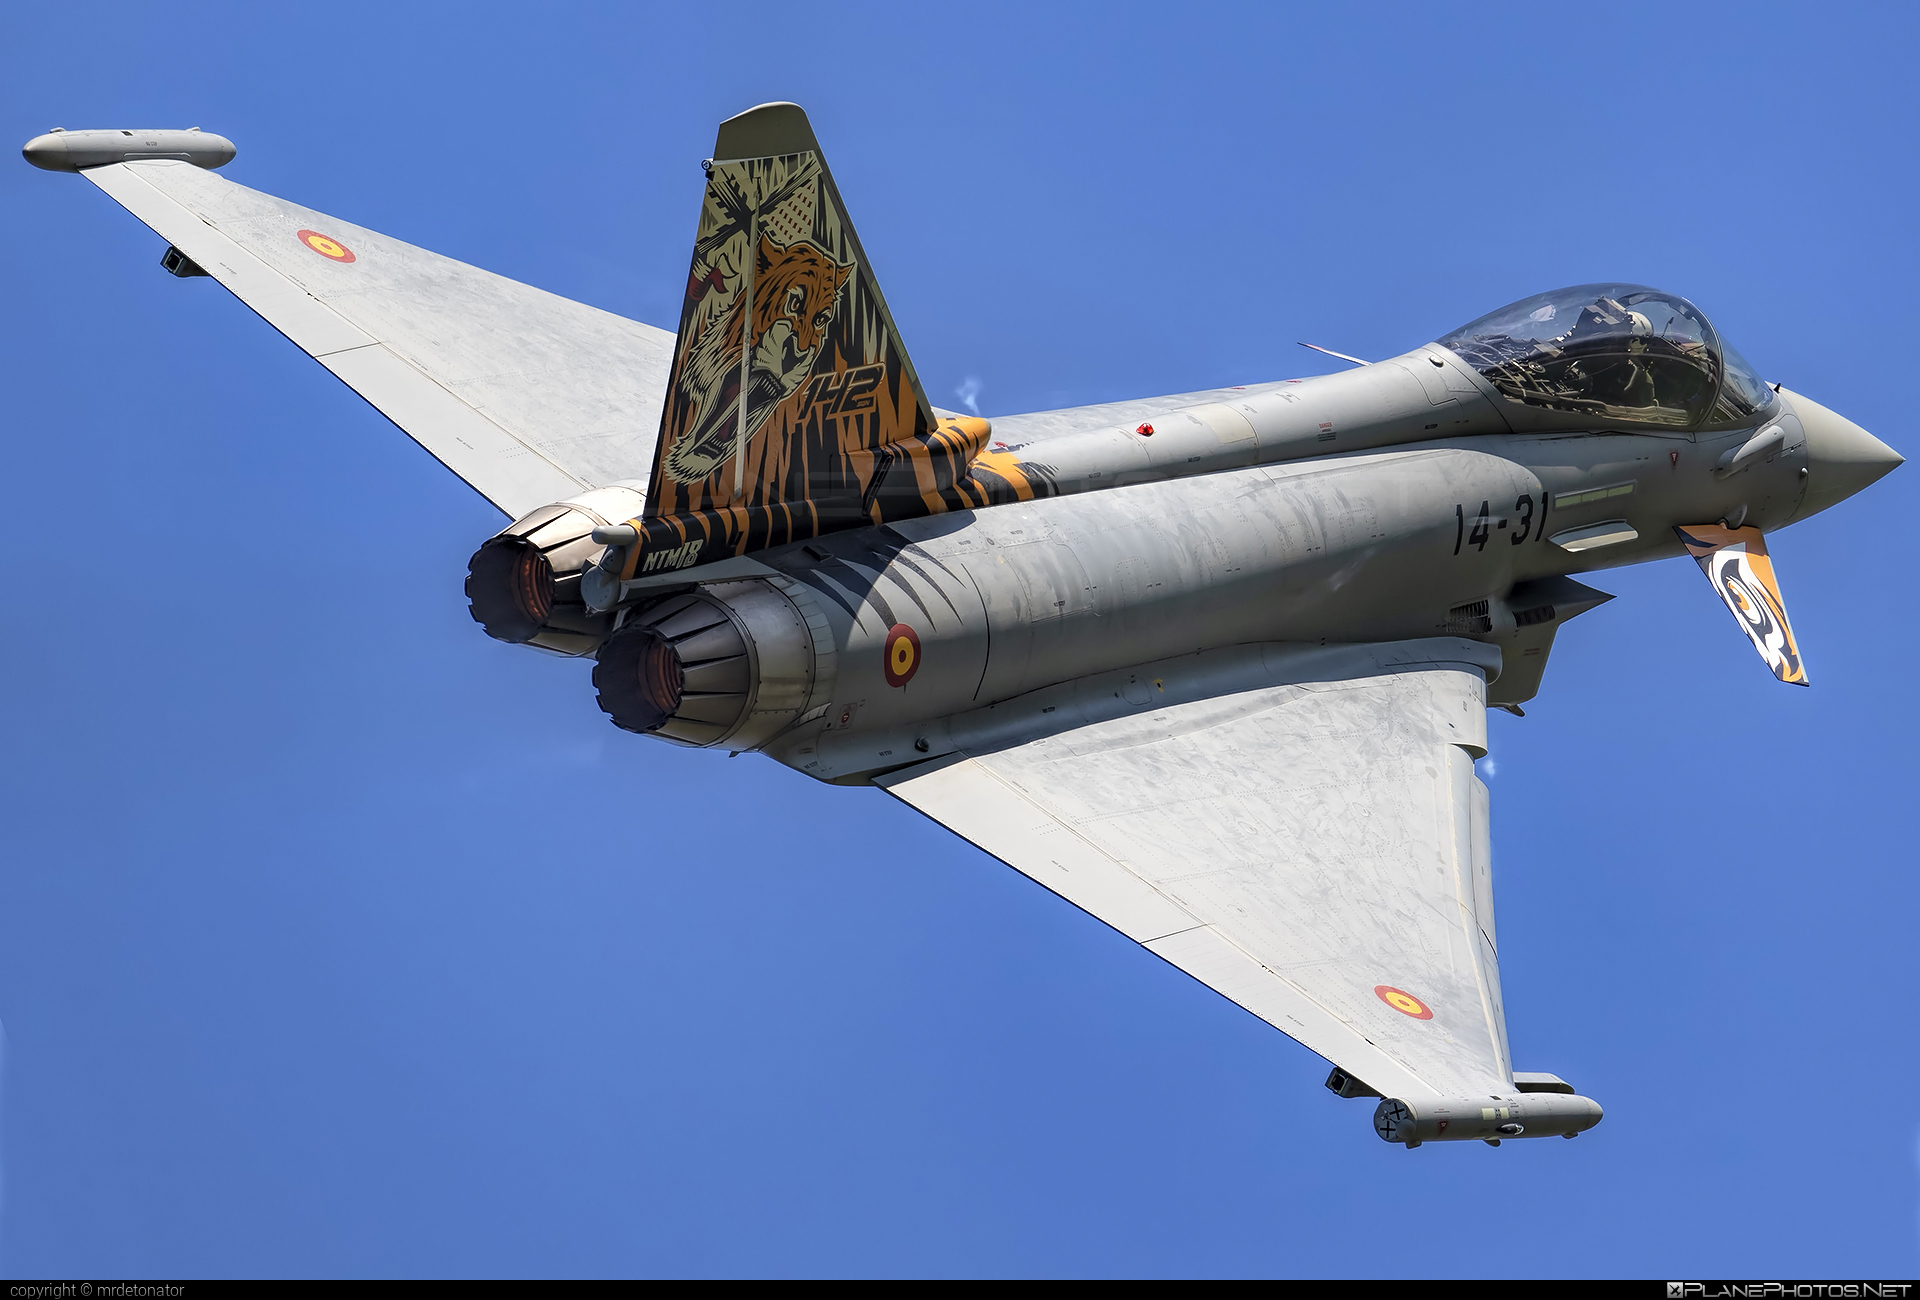 Eurofighter Typhoon S - C.16-73 operated by Ejército del Aire (Spanish Air Force) #ef2000 #ejercitoDelAire #eurofighter #eurofightertyphoon #natodays #natodays2018 #spanishAirForce #typhoon #typhoons